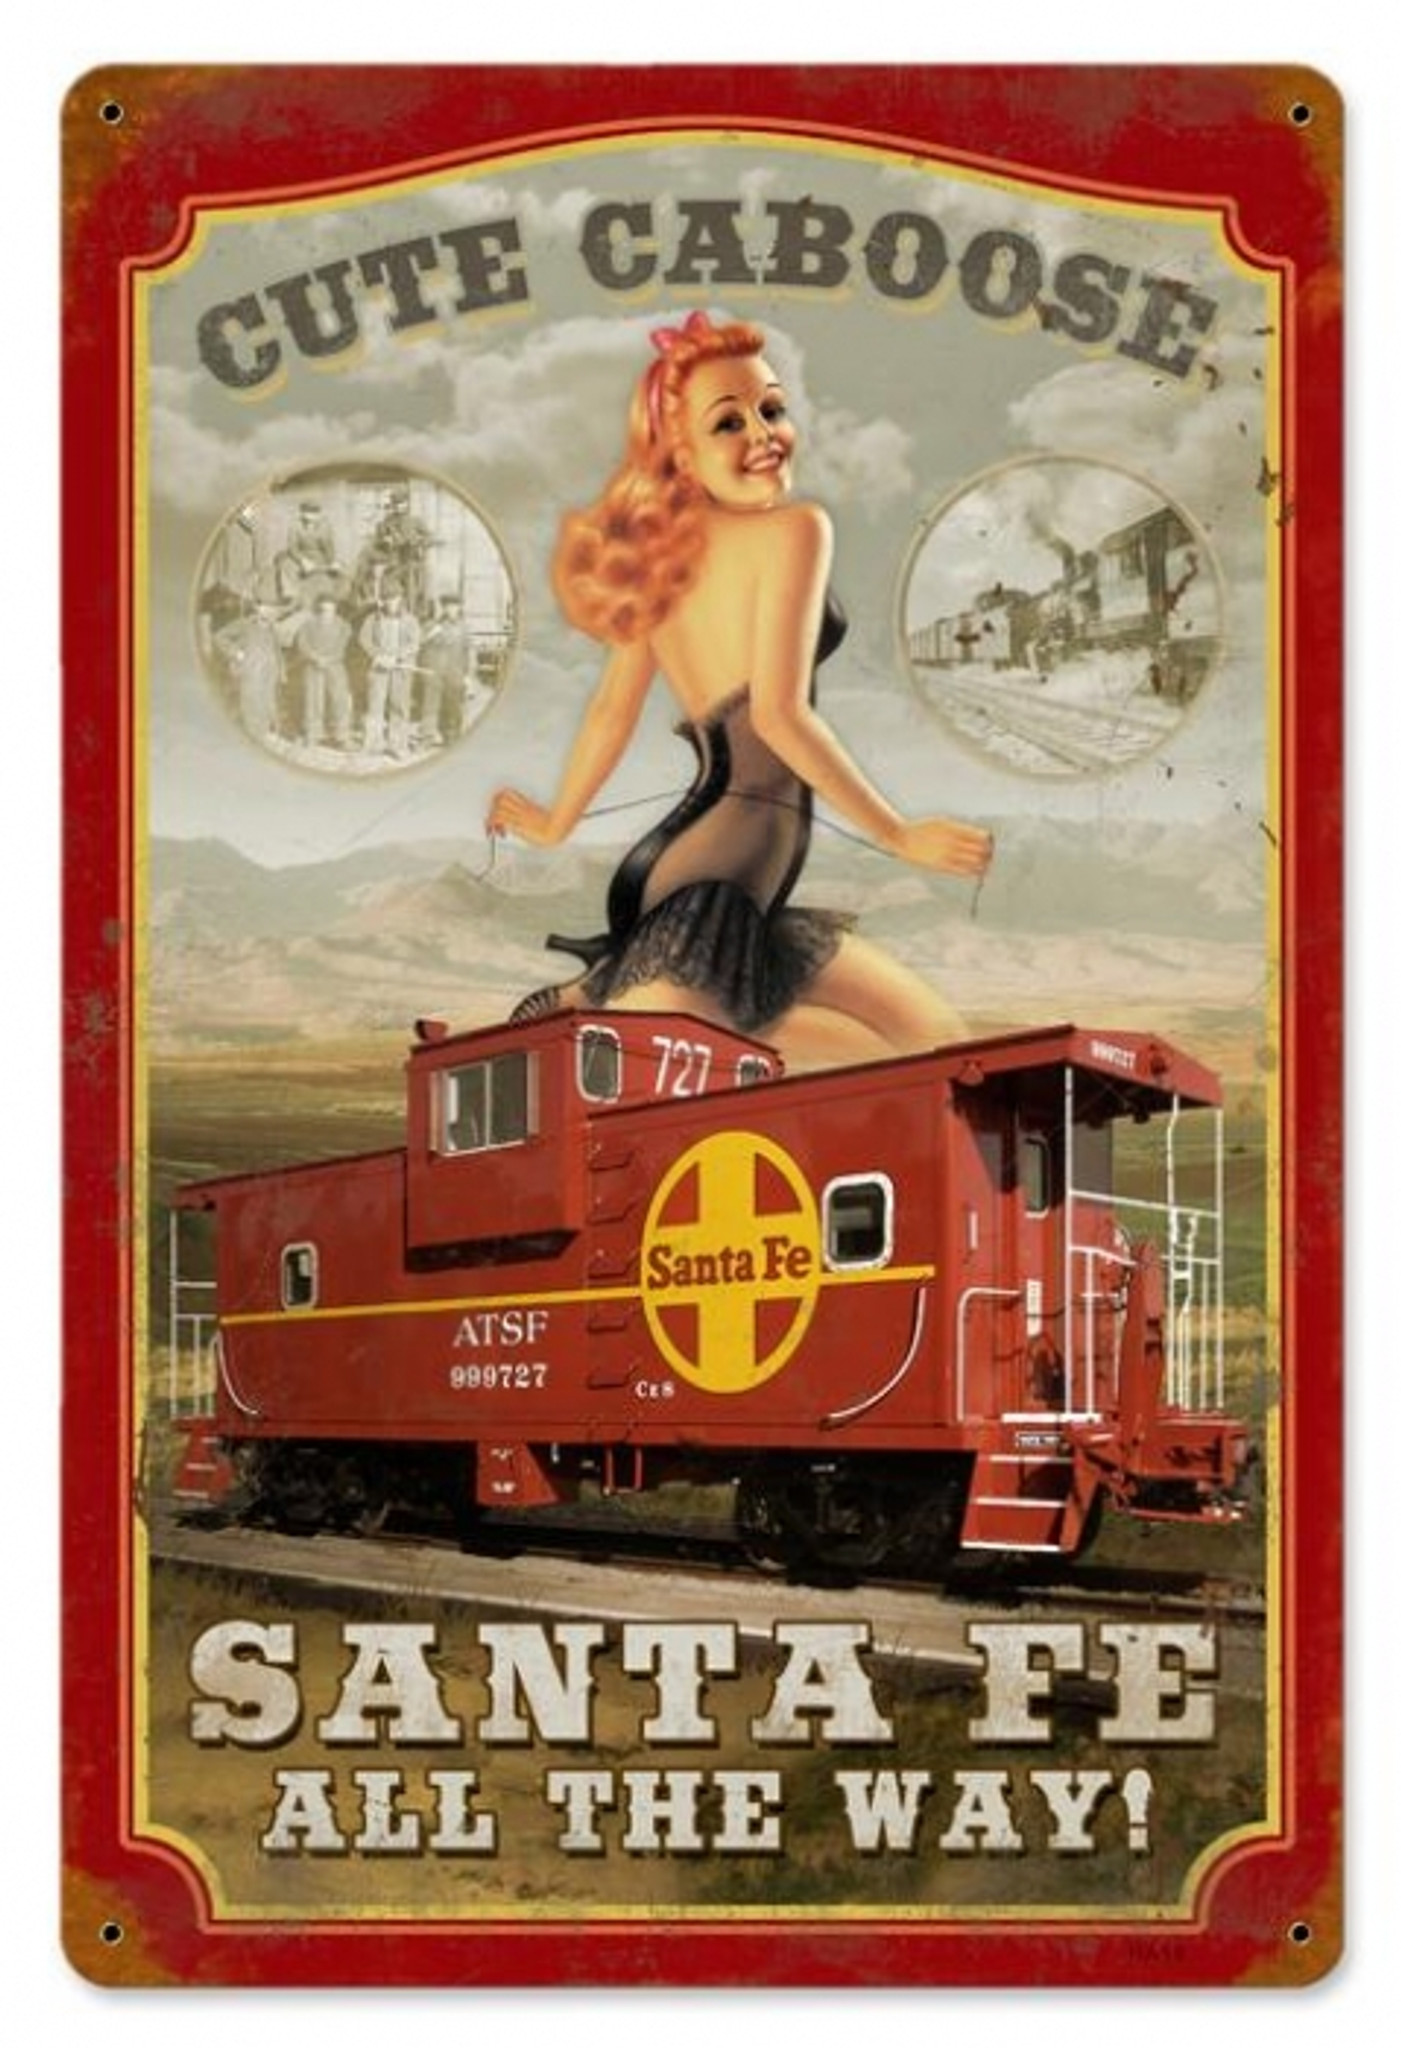 Retro Sante Fe Caboose Pin Up Girl Metal Sign 18 X 12 Inches